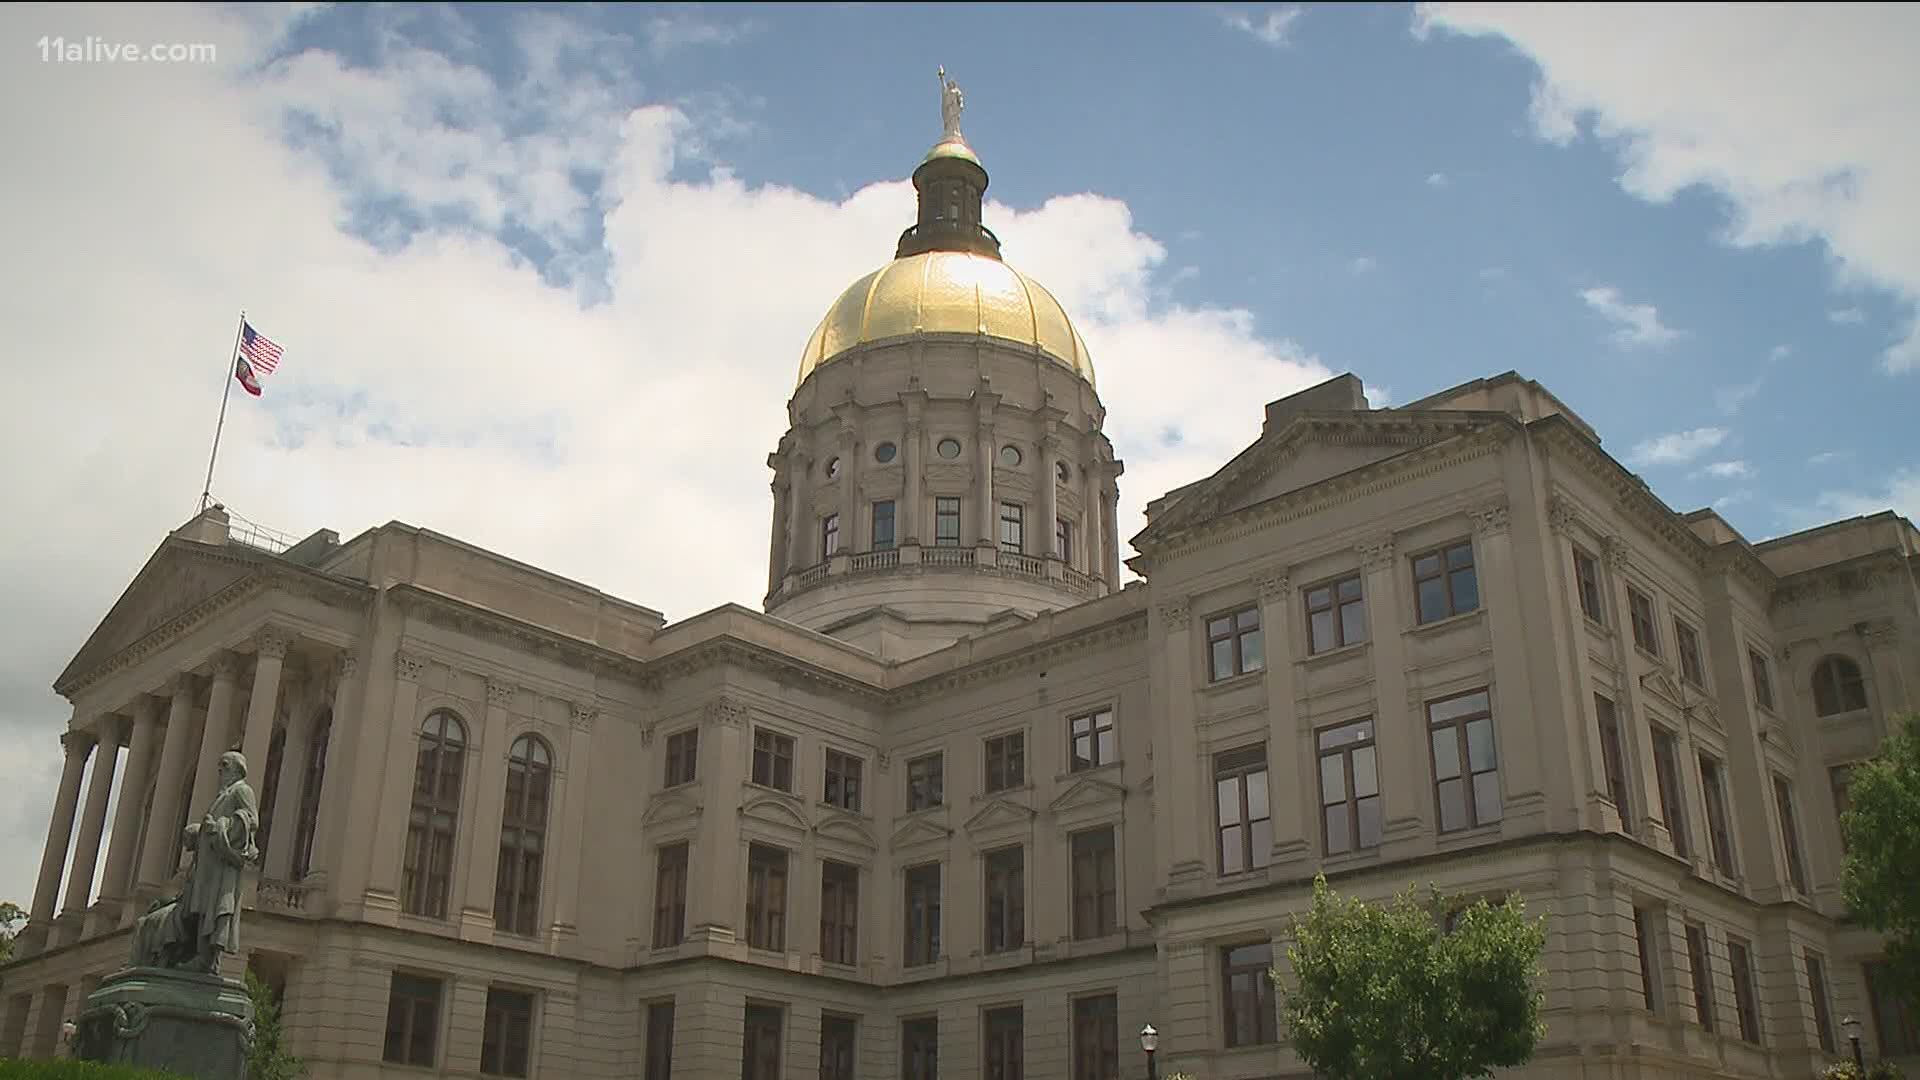 It appears Georgia lawmakers will vote Friday on next year’s budget – the last day of this year’s on-again, off-again, on again legislative session.